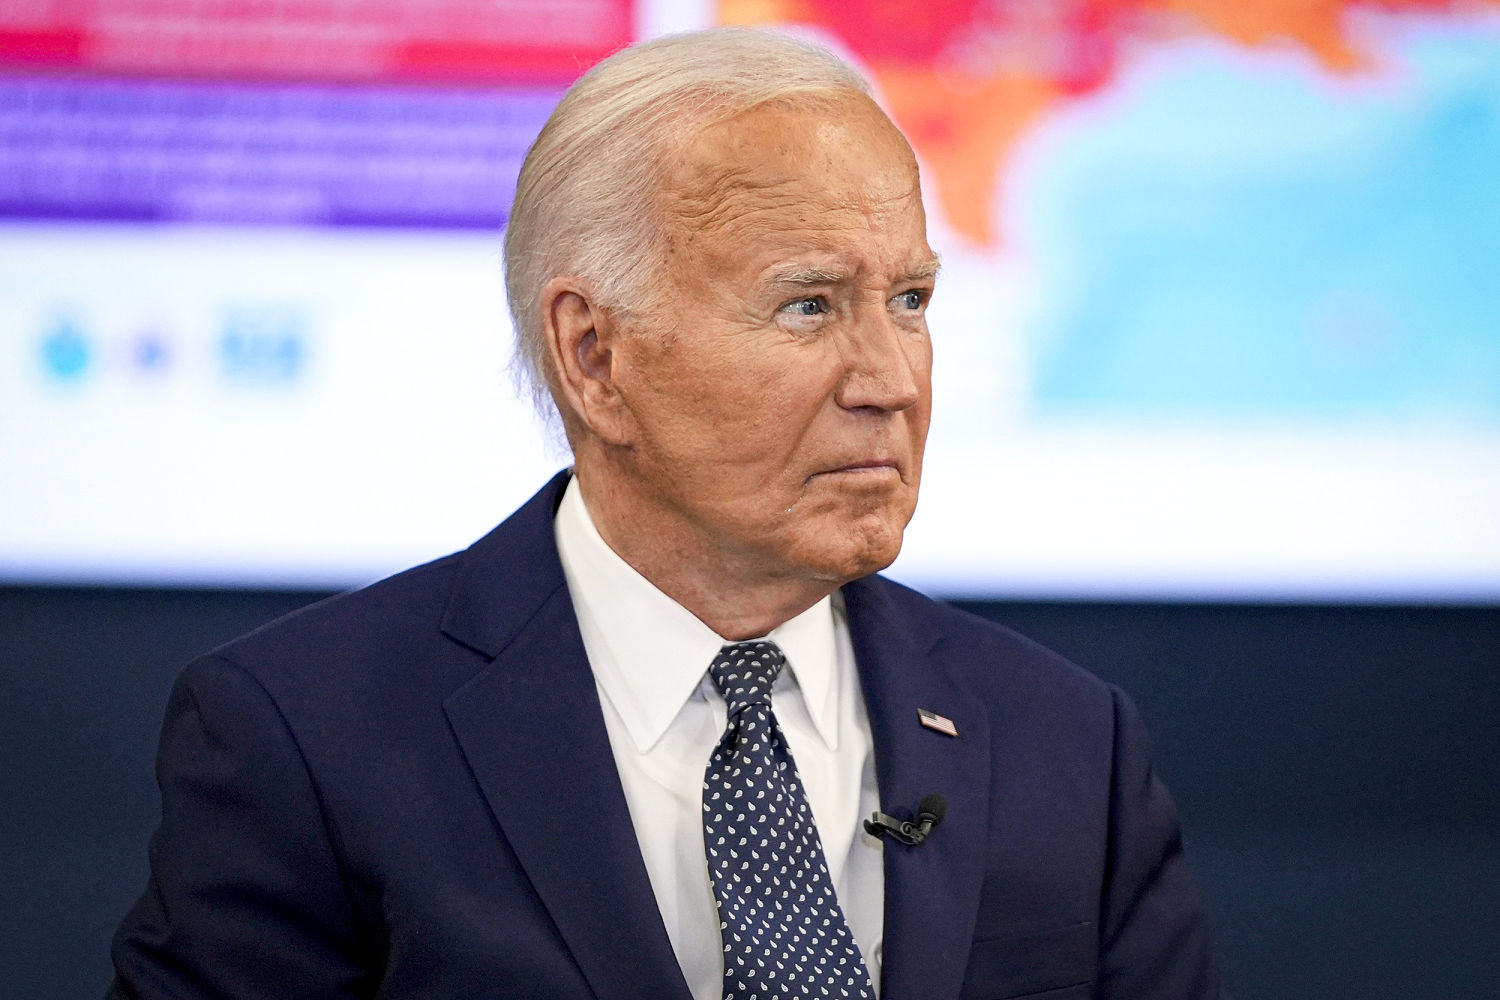 Second Democrat in Congress calls for Biden to bow out of 2024 race